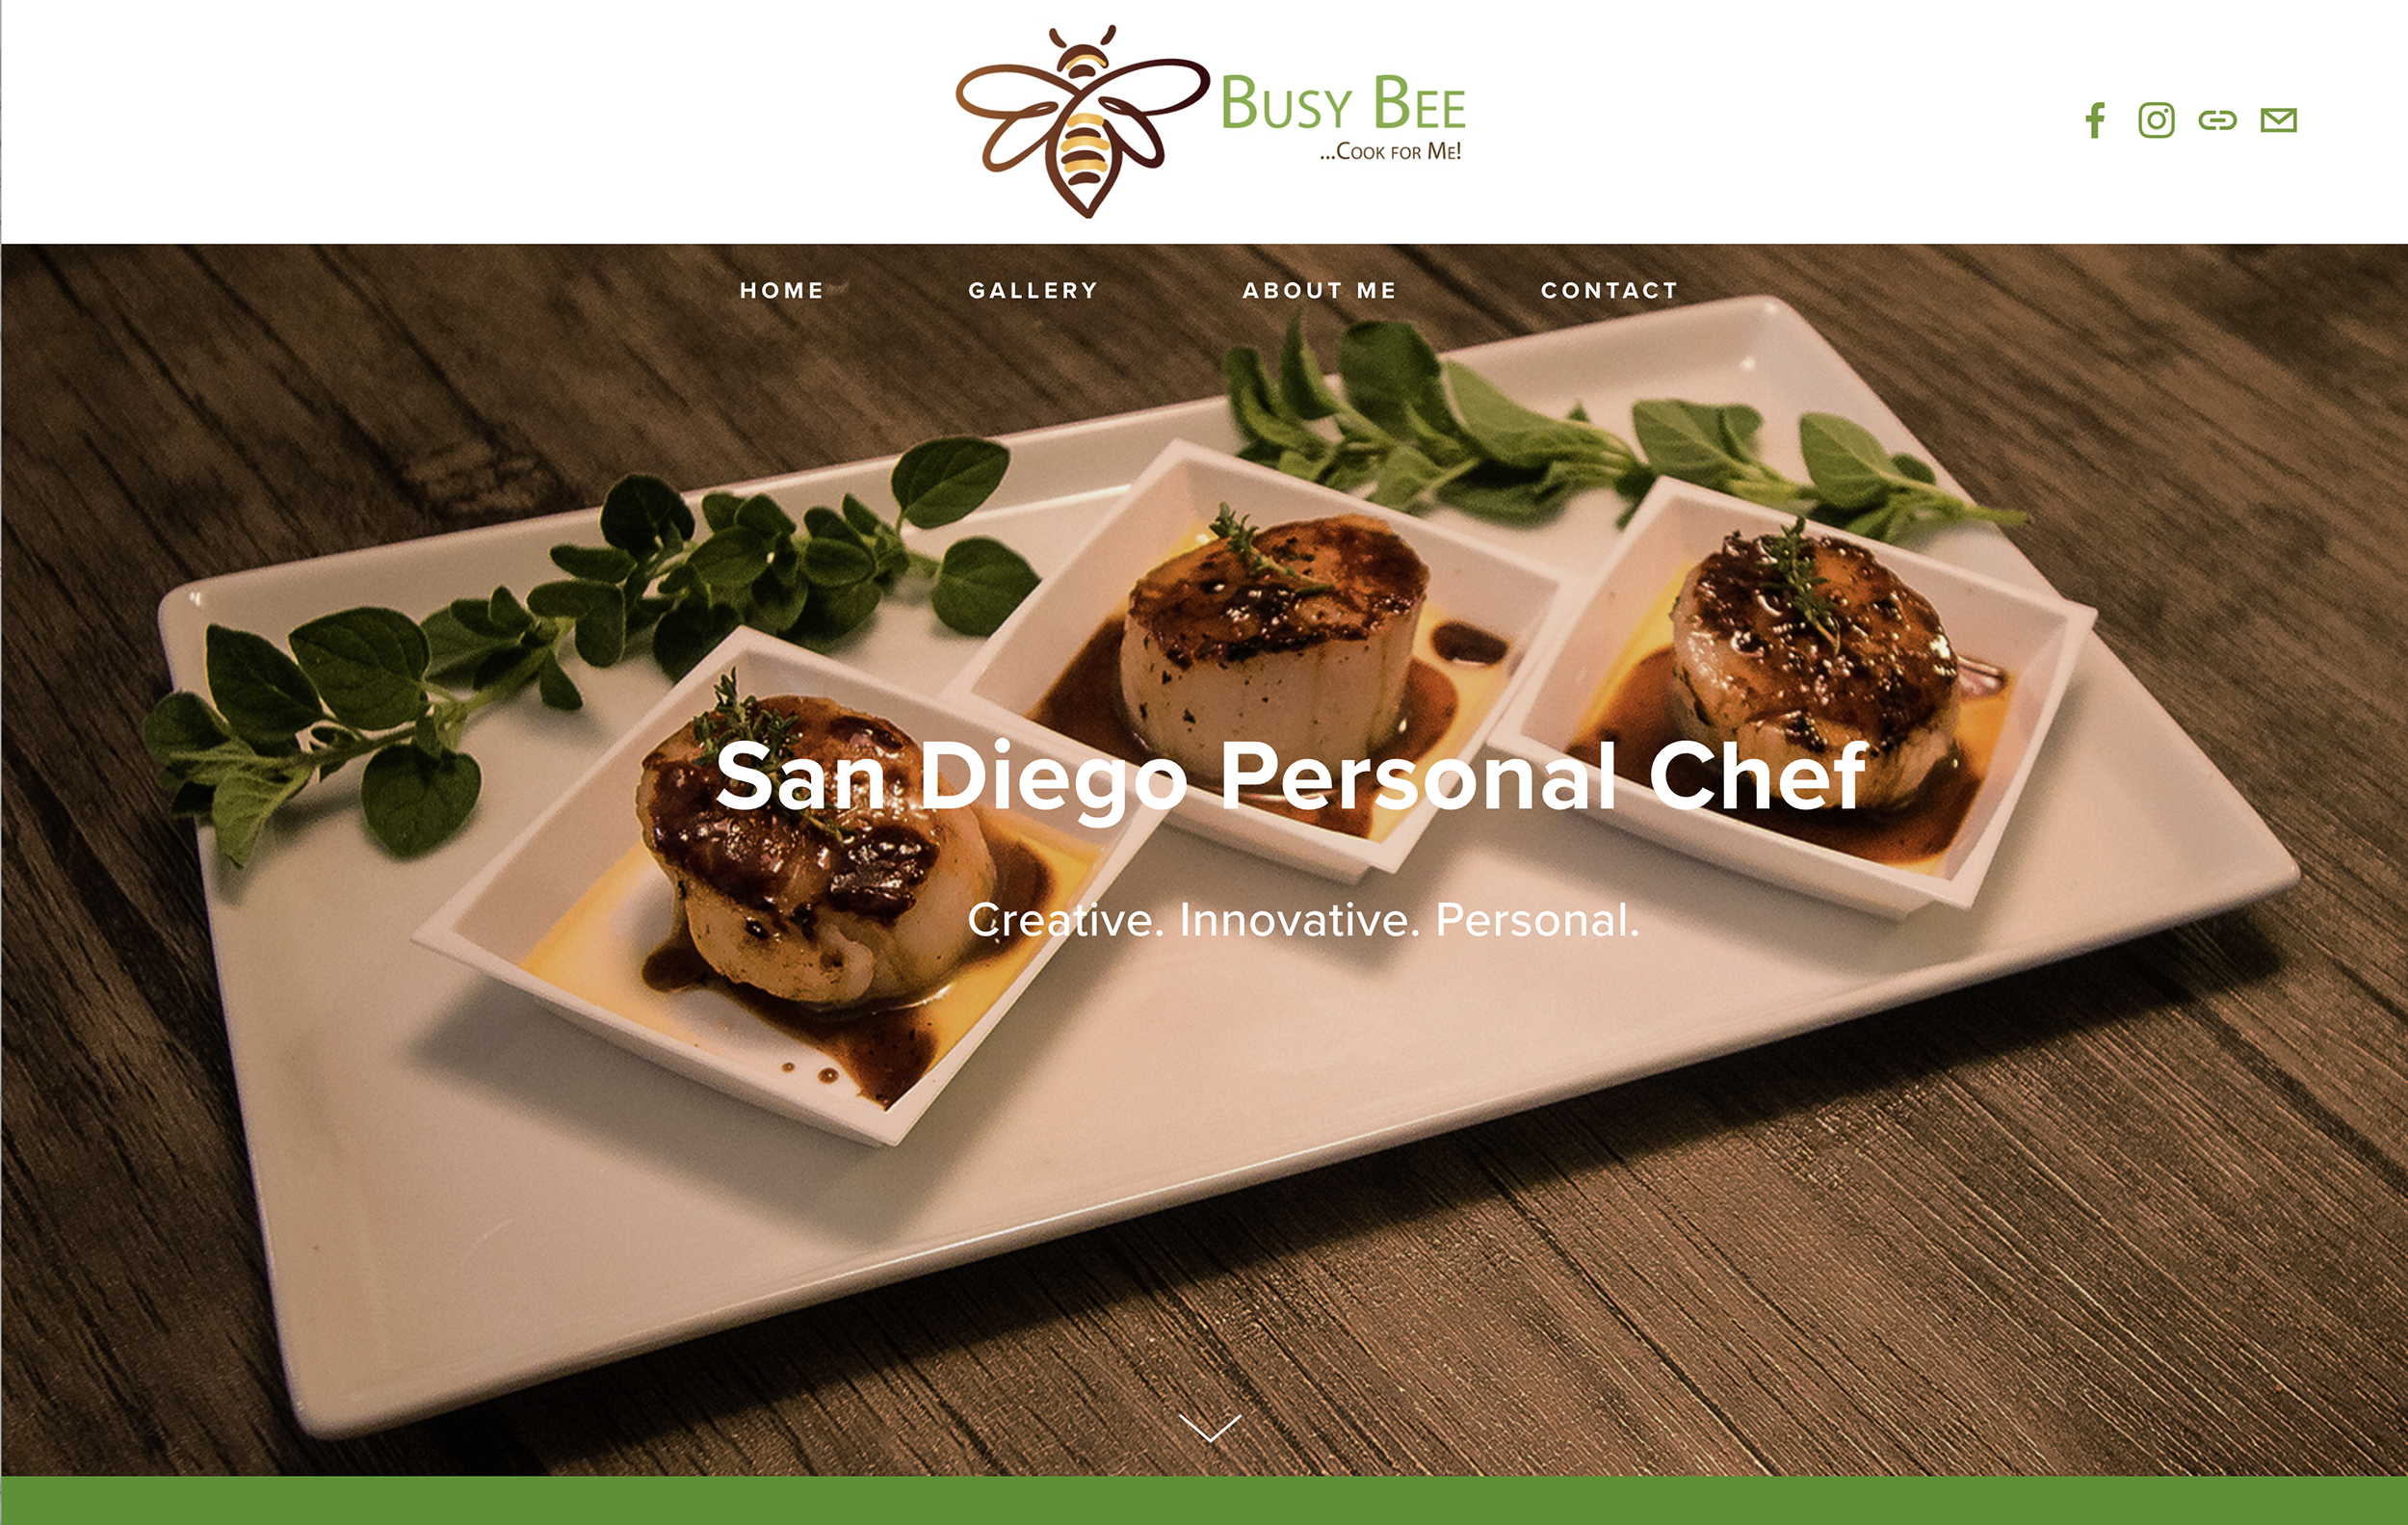 Busy Bee Personal Check website homepage.png